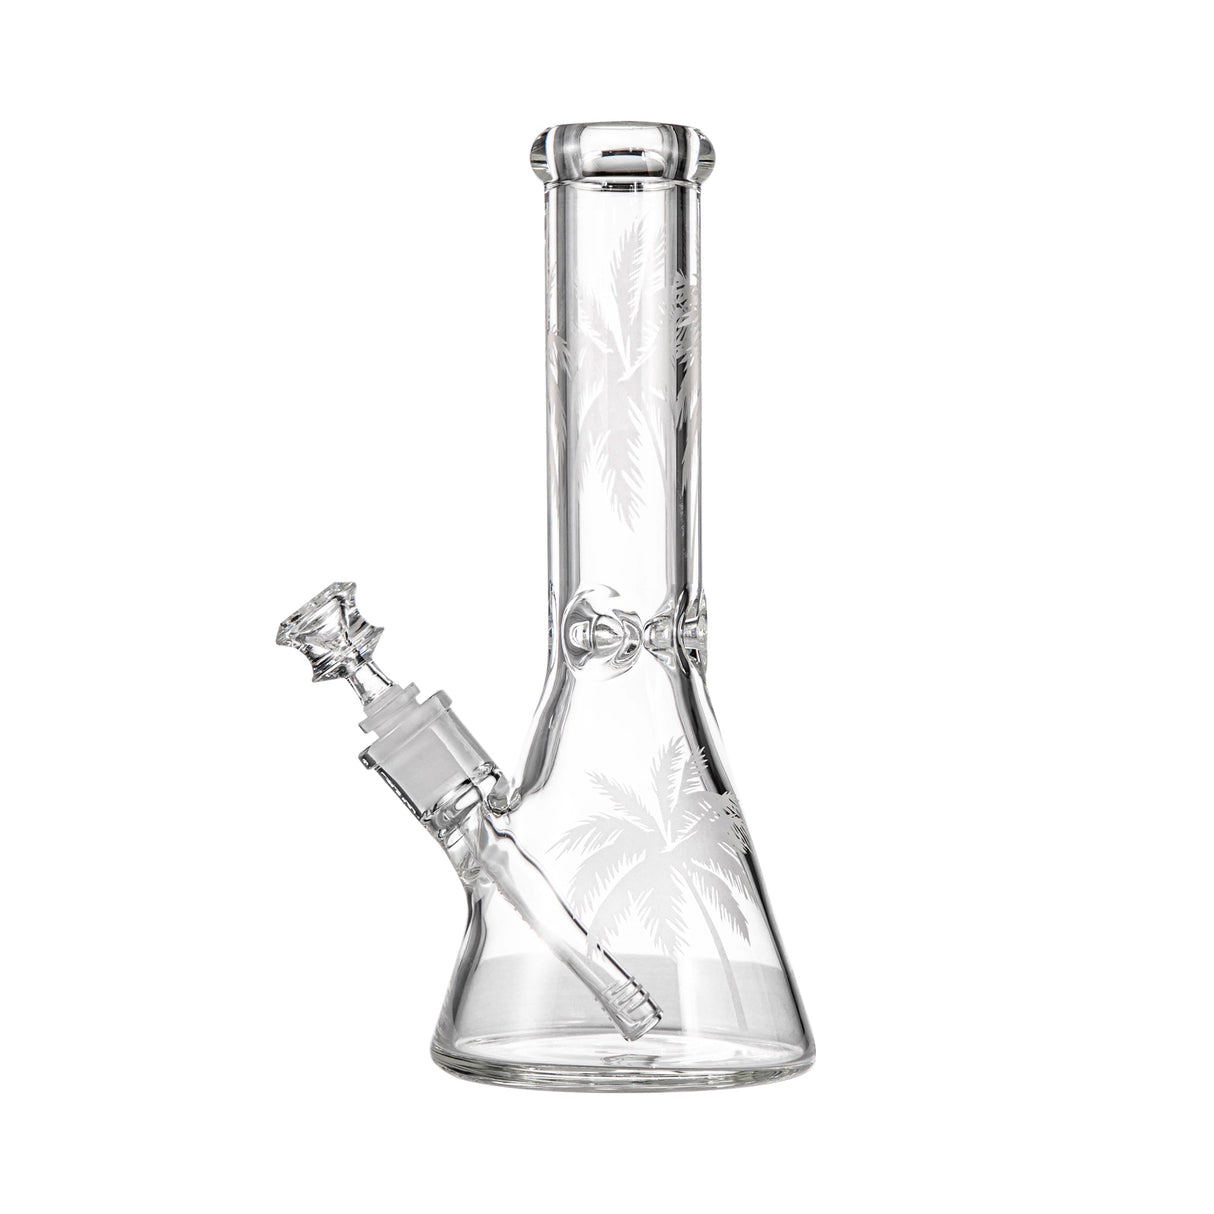 Sunakin America BKR9 - Clear Glass Beaker Bong with Etched Design - Front View